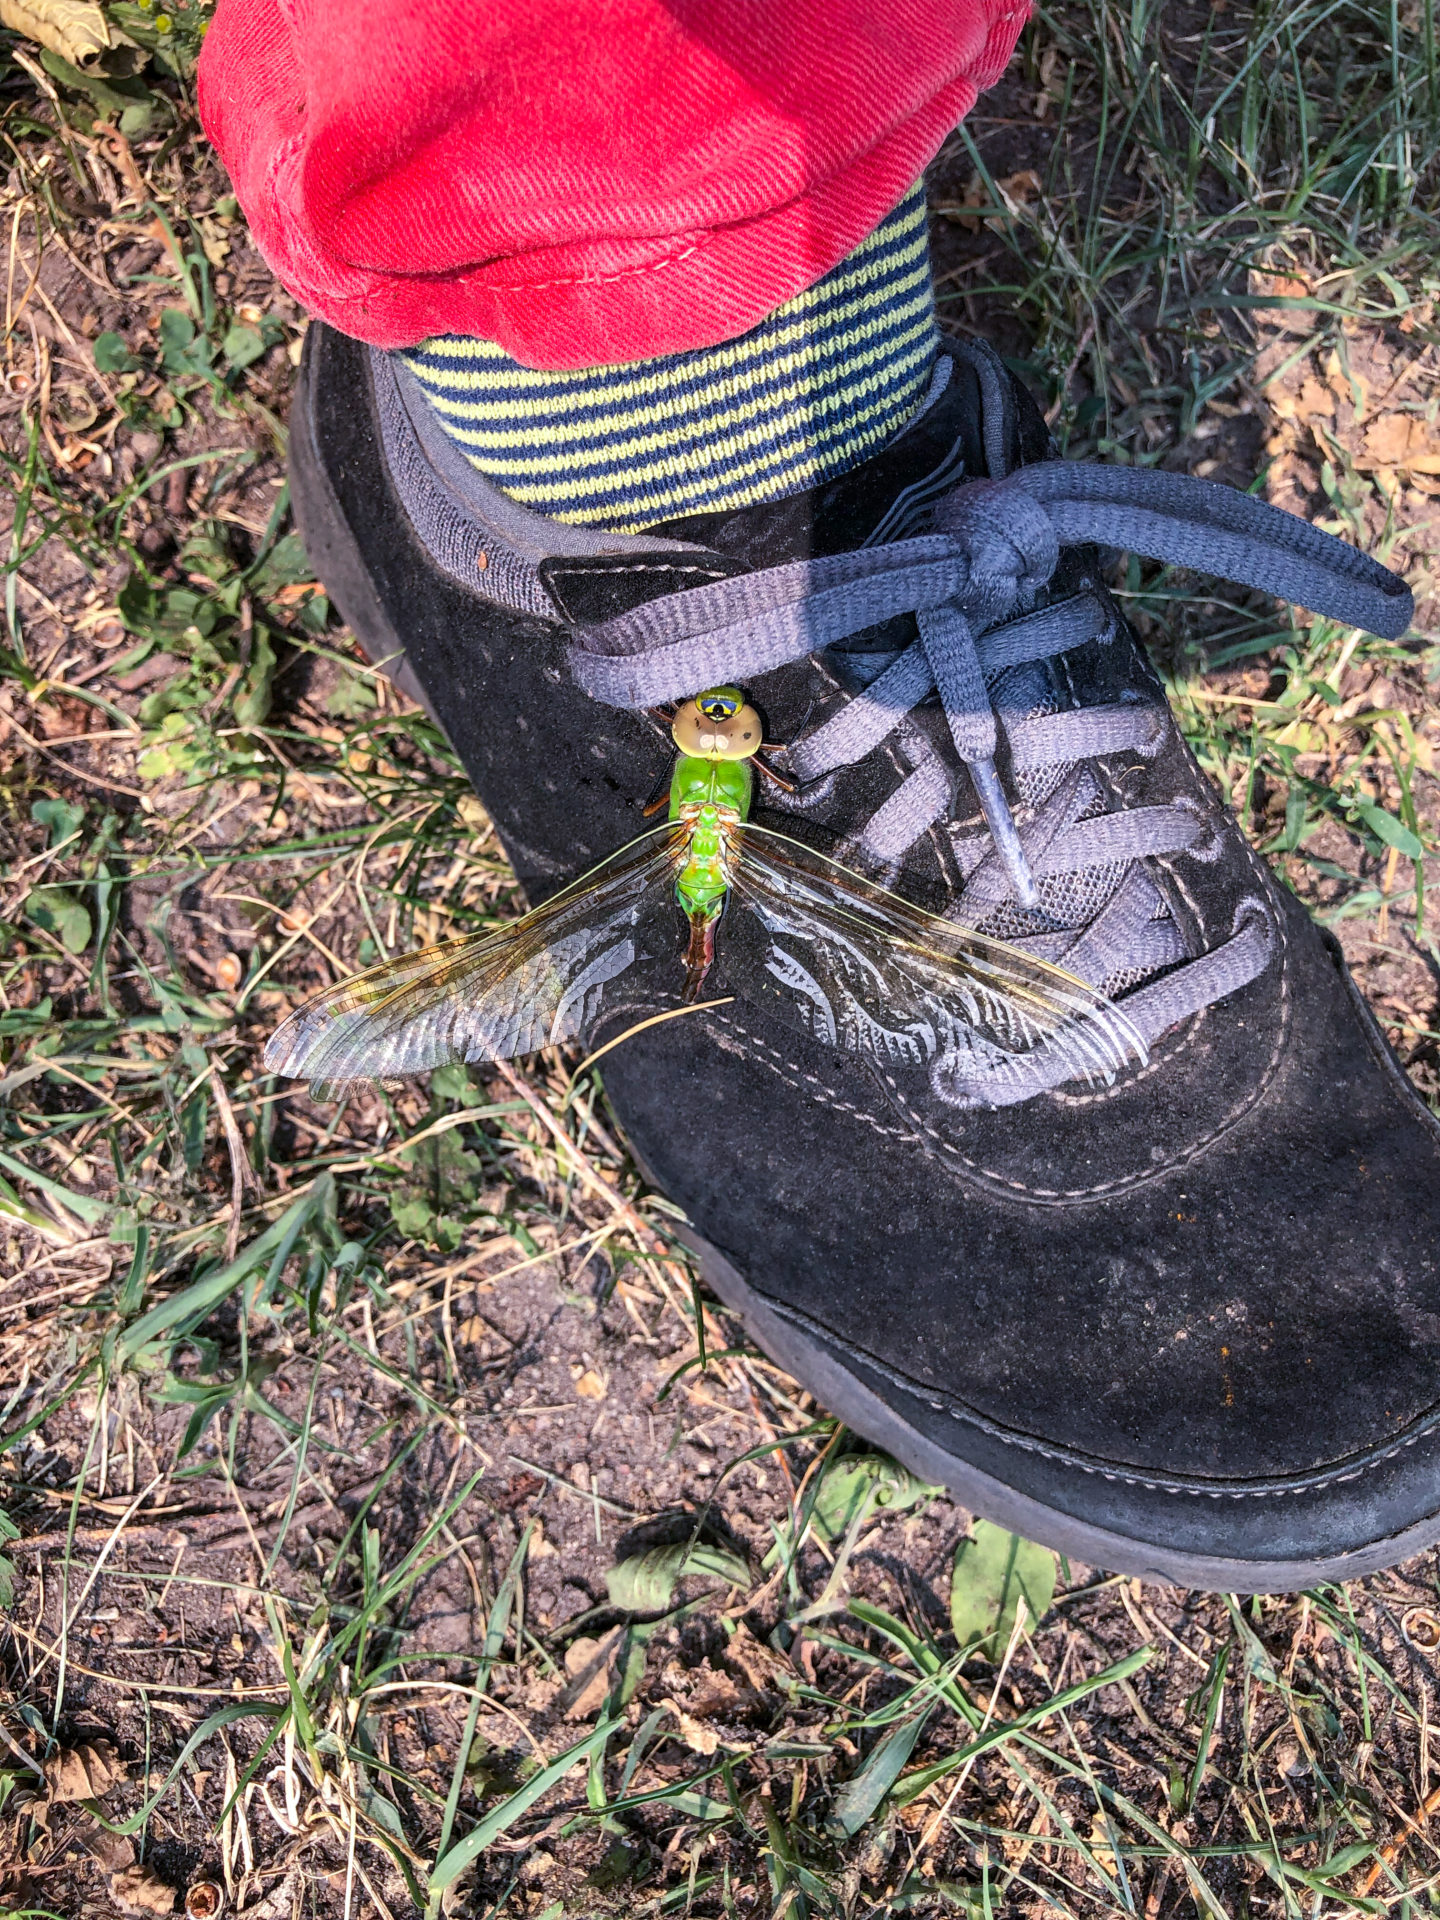 Large winged insect on shoe